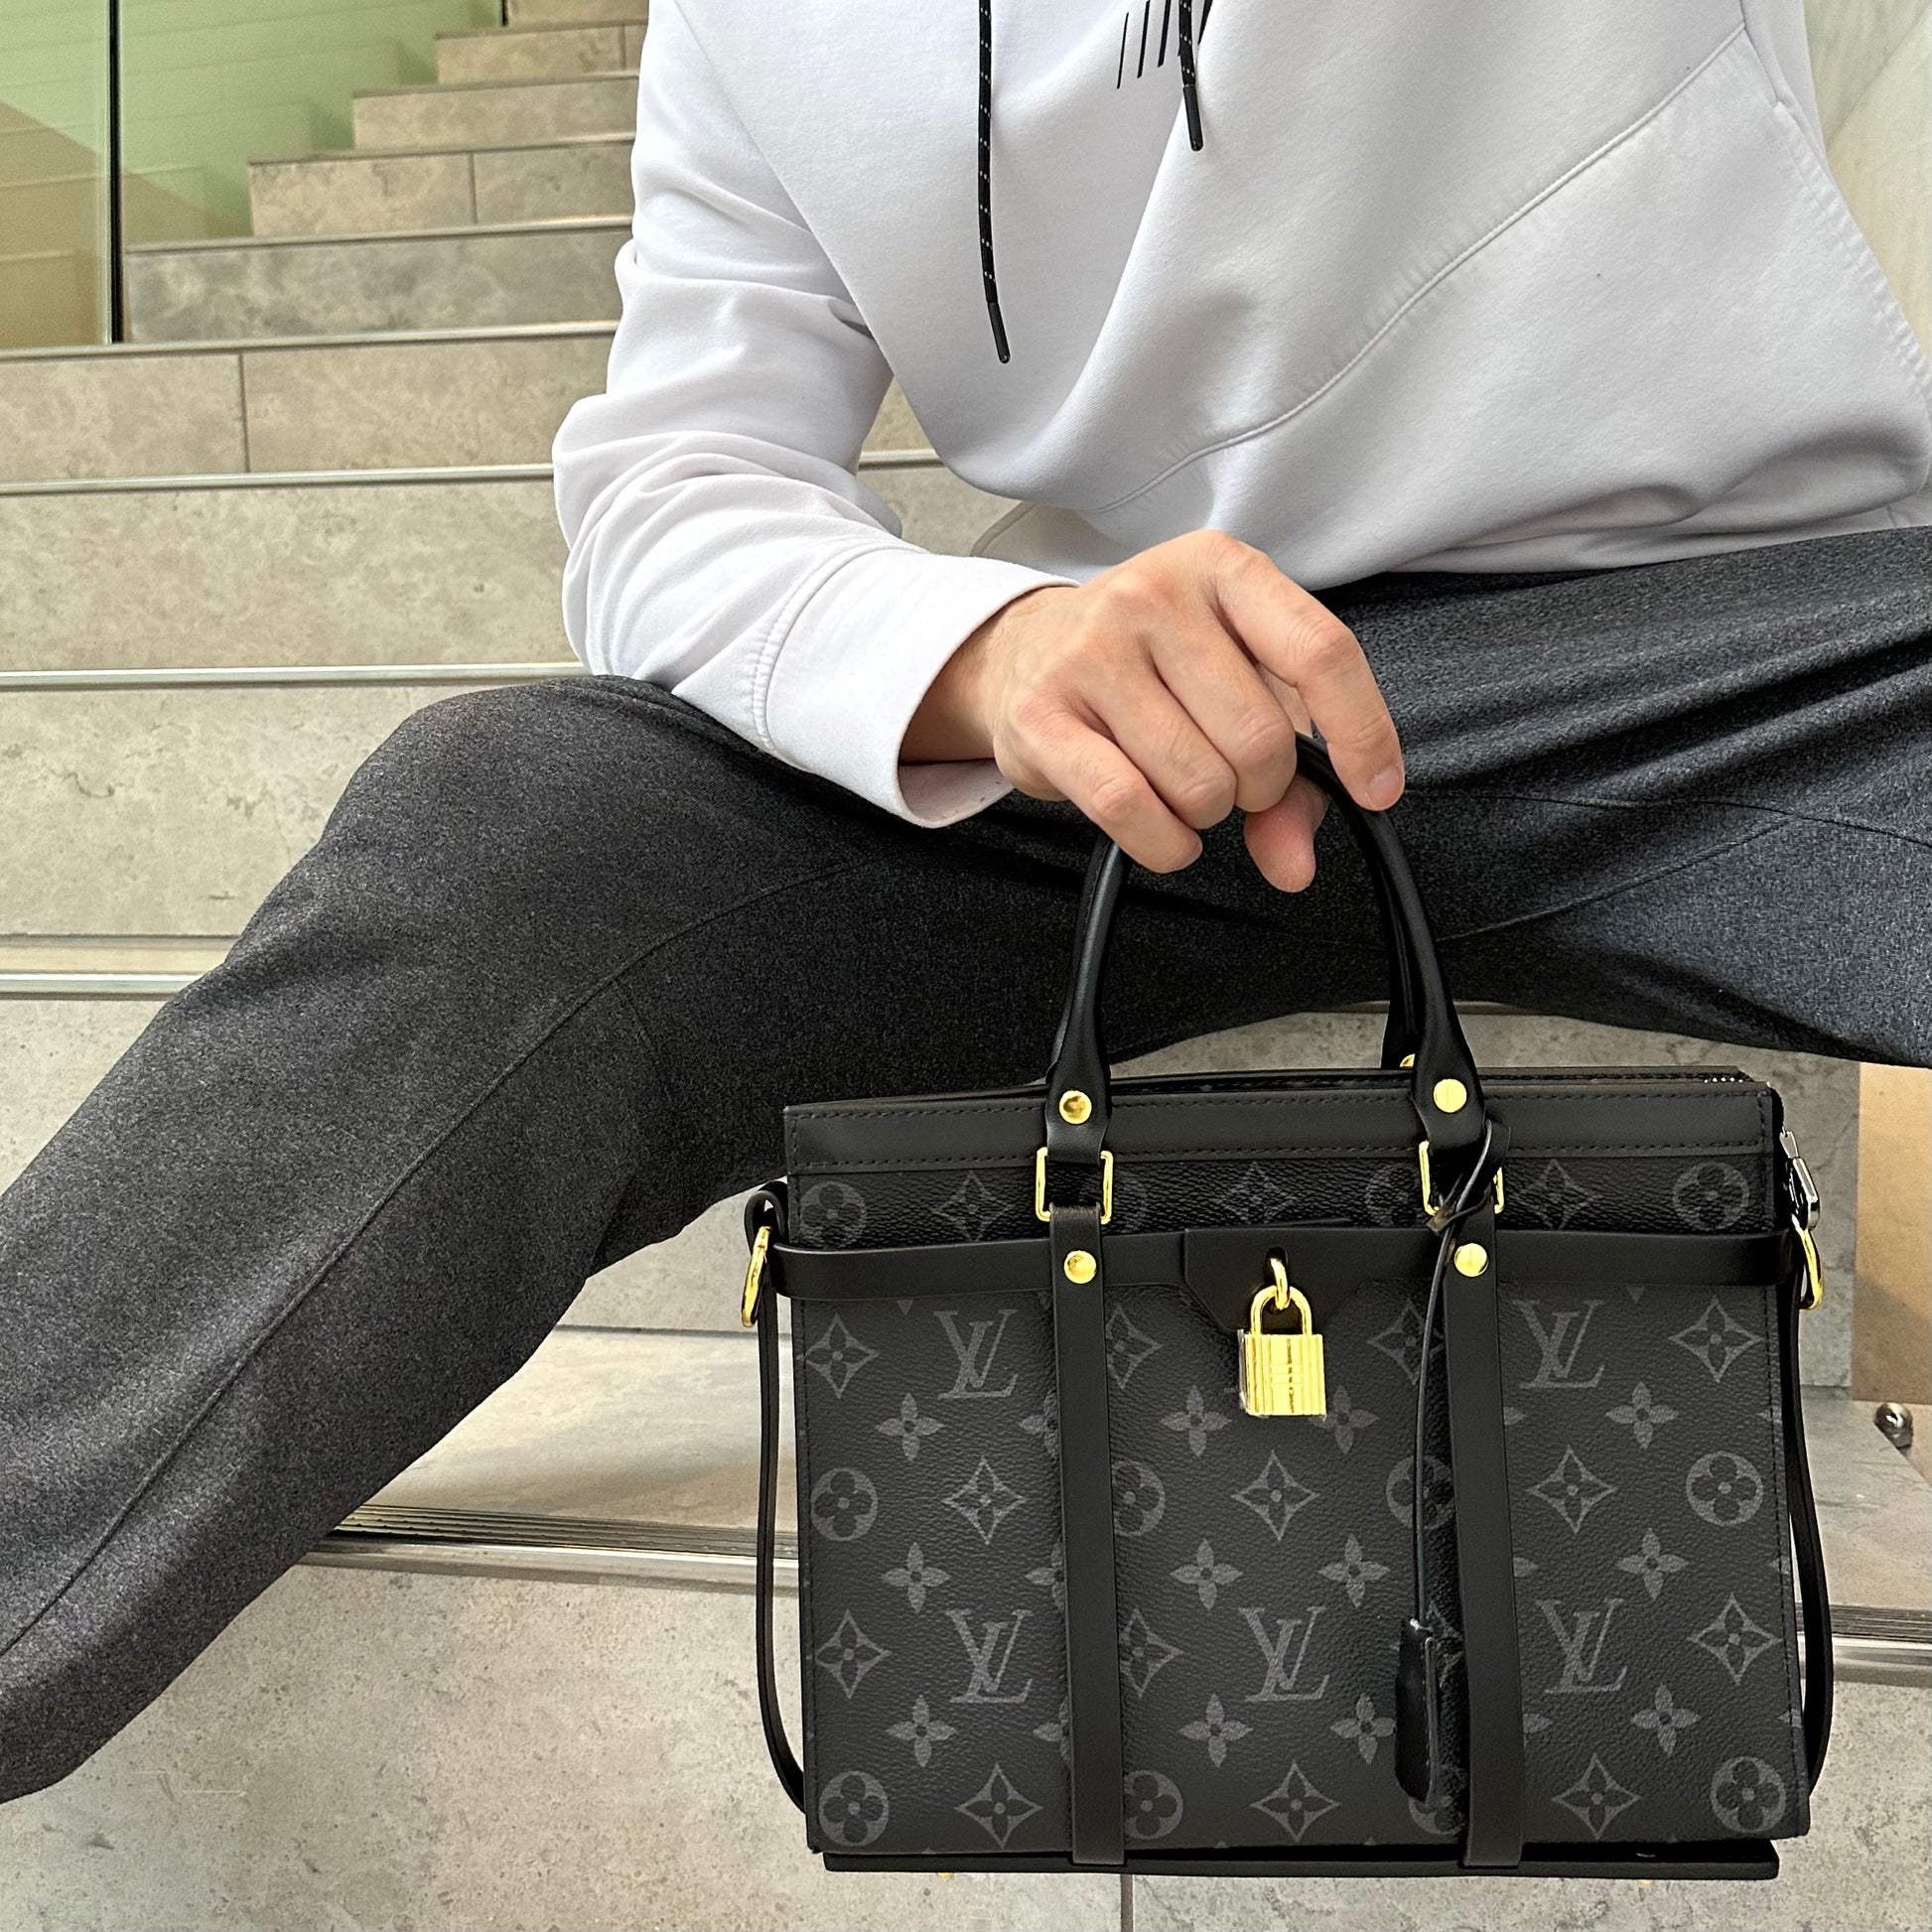 How do we feel about this T26 encasement? : r/Louisvuitton